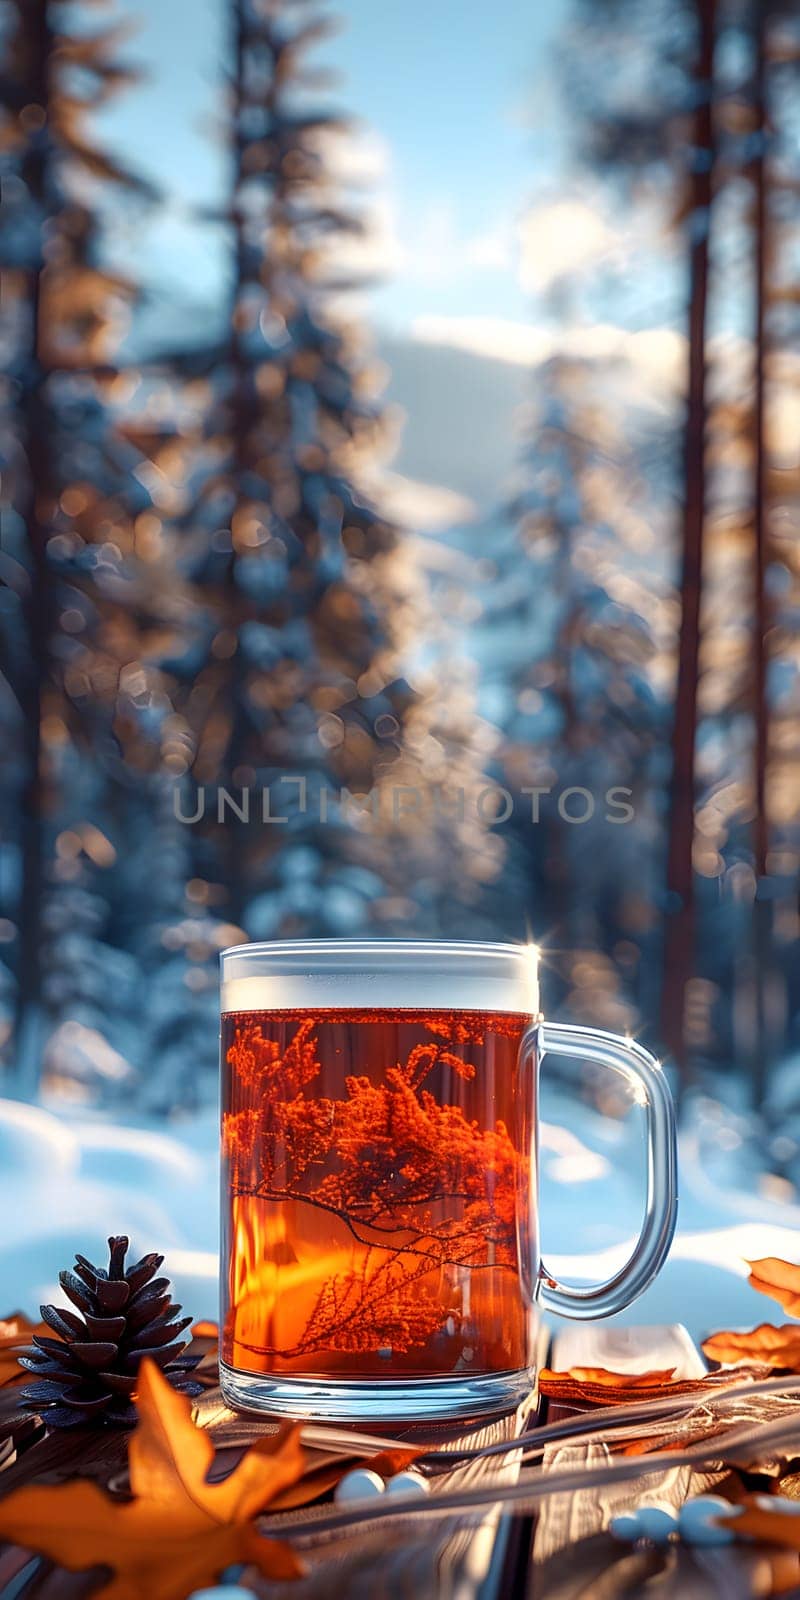 A glass of beer rests on a wooden table in the middle of the forest landscape. The liquid inside reflects the surrounding trees and branches, as the sunlight filters through the canopy above